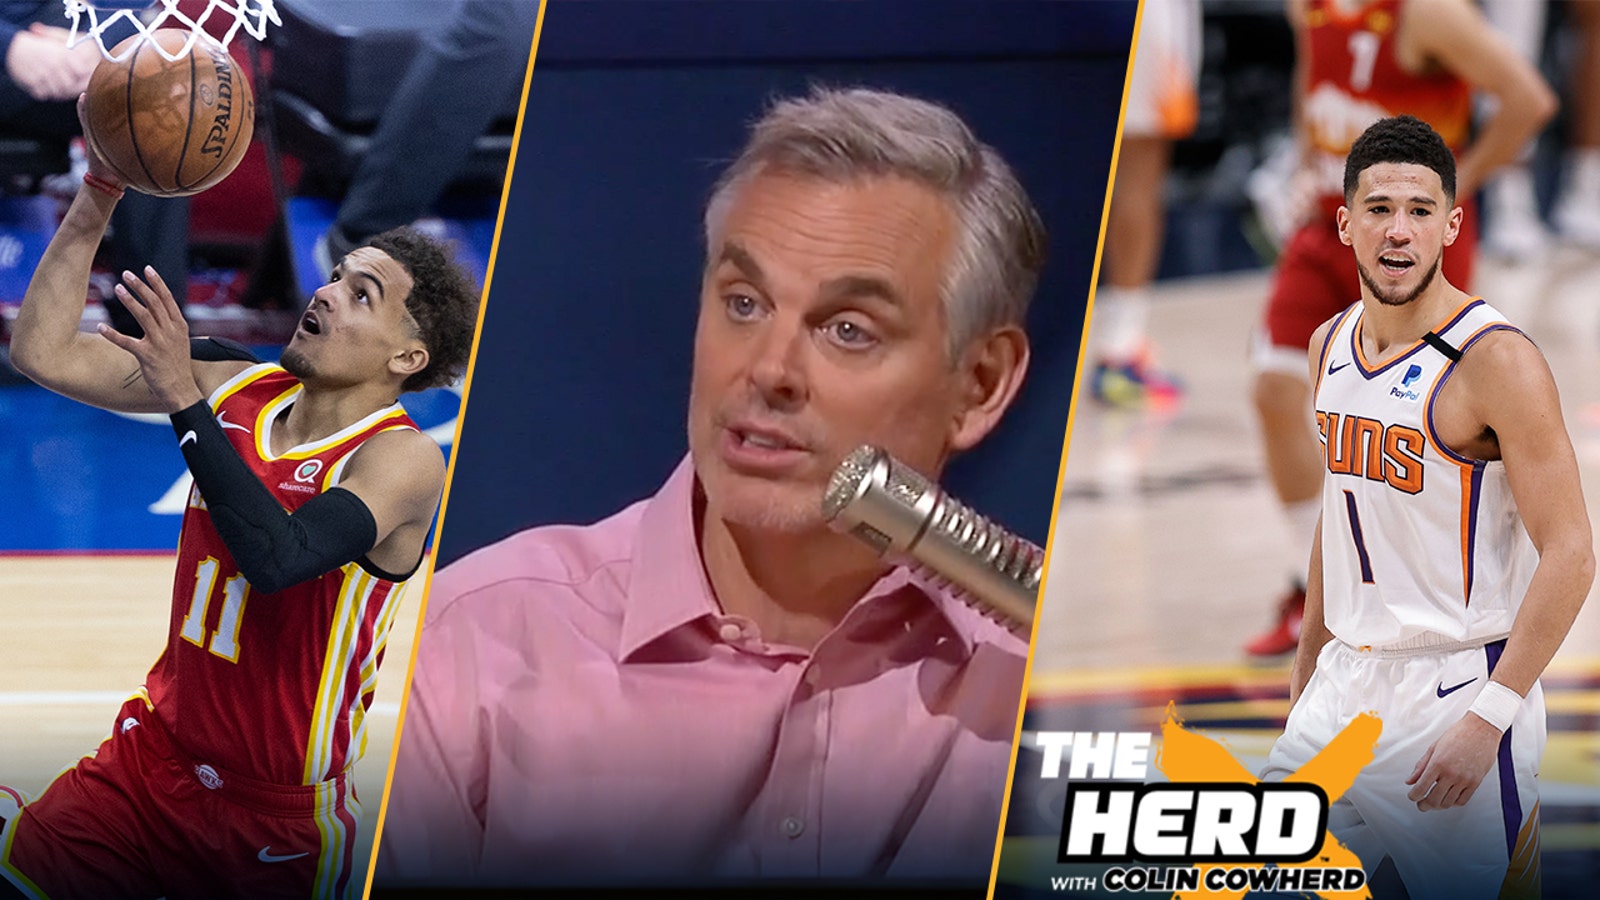 Colin Cowherd ranks the Top 10 NBA Players under 25 | THE HERD